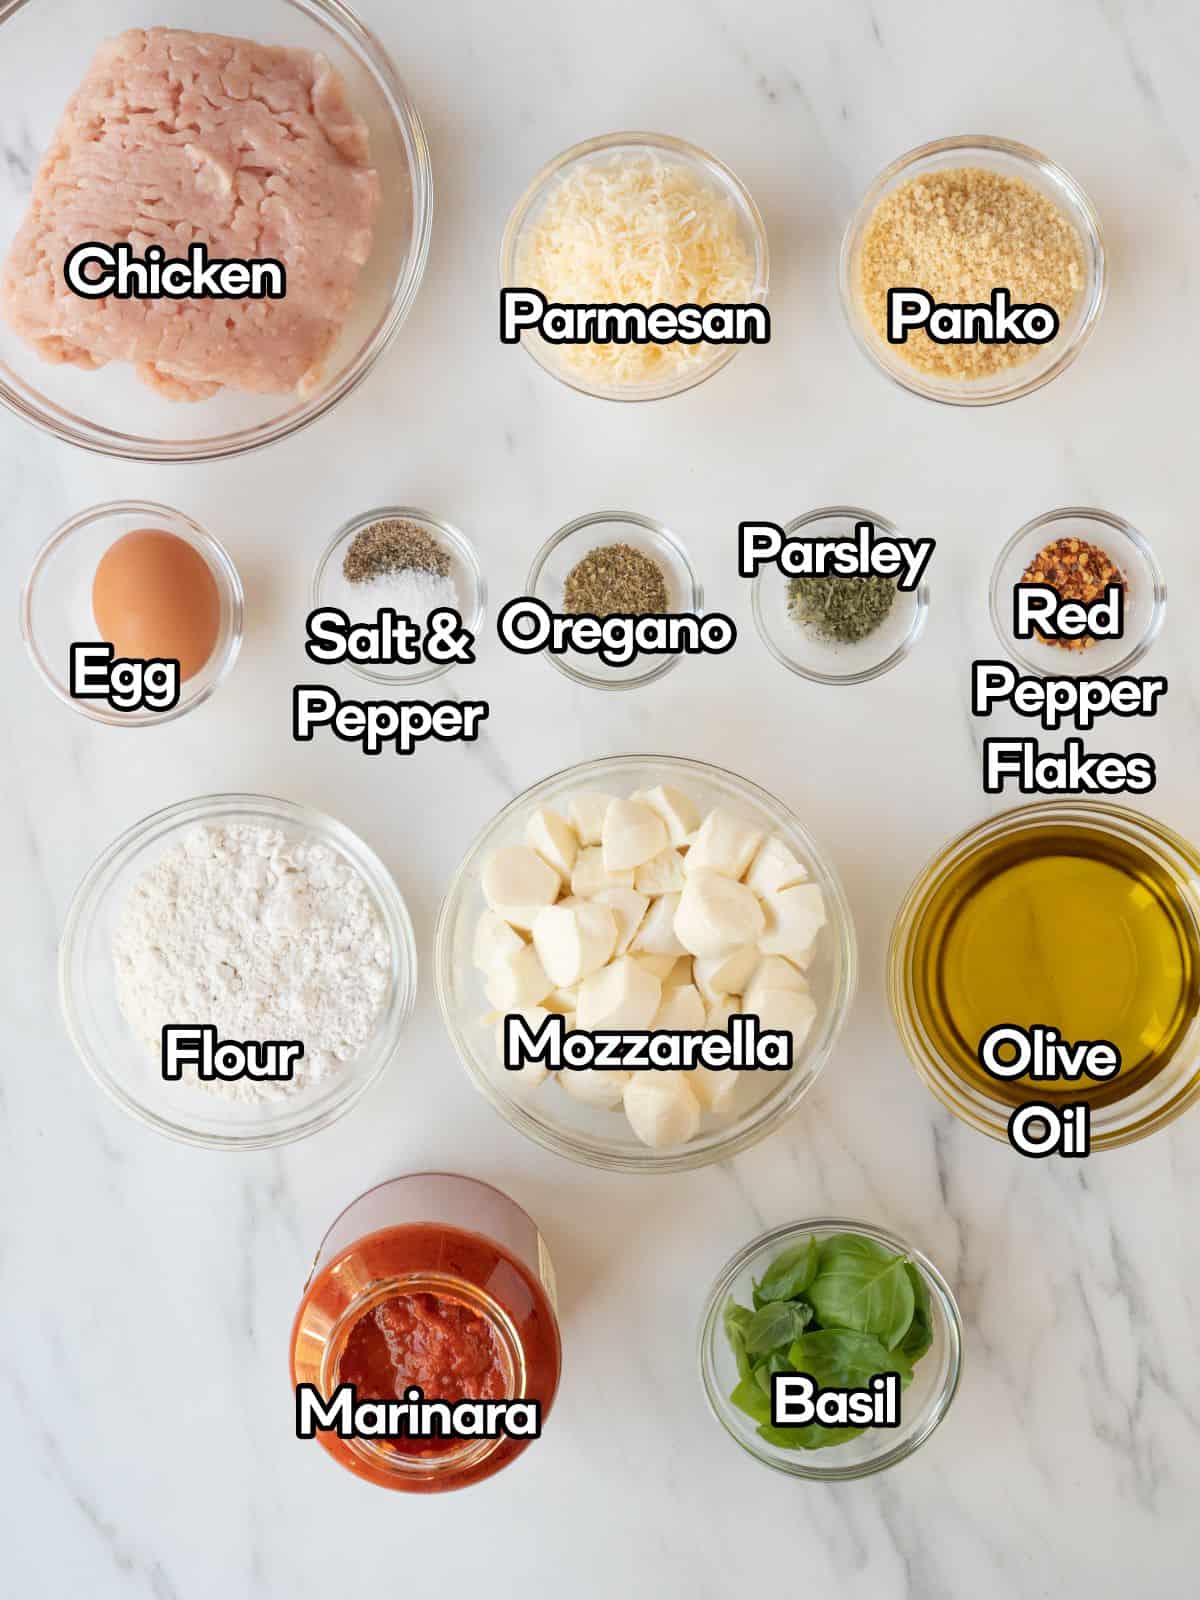 A mise-en-place of all the ingredients to make chicken parm meatballs.